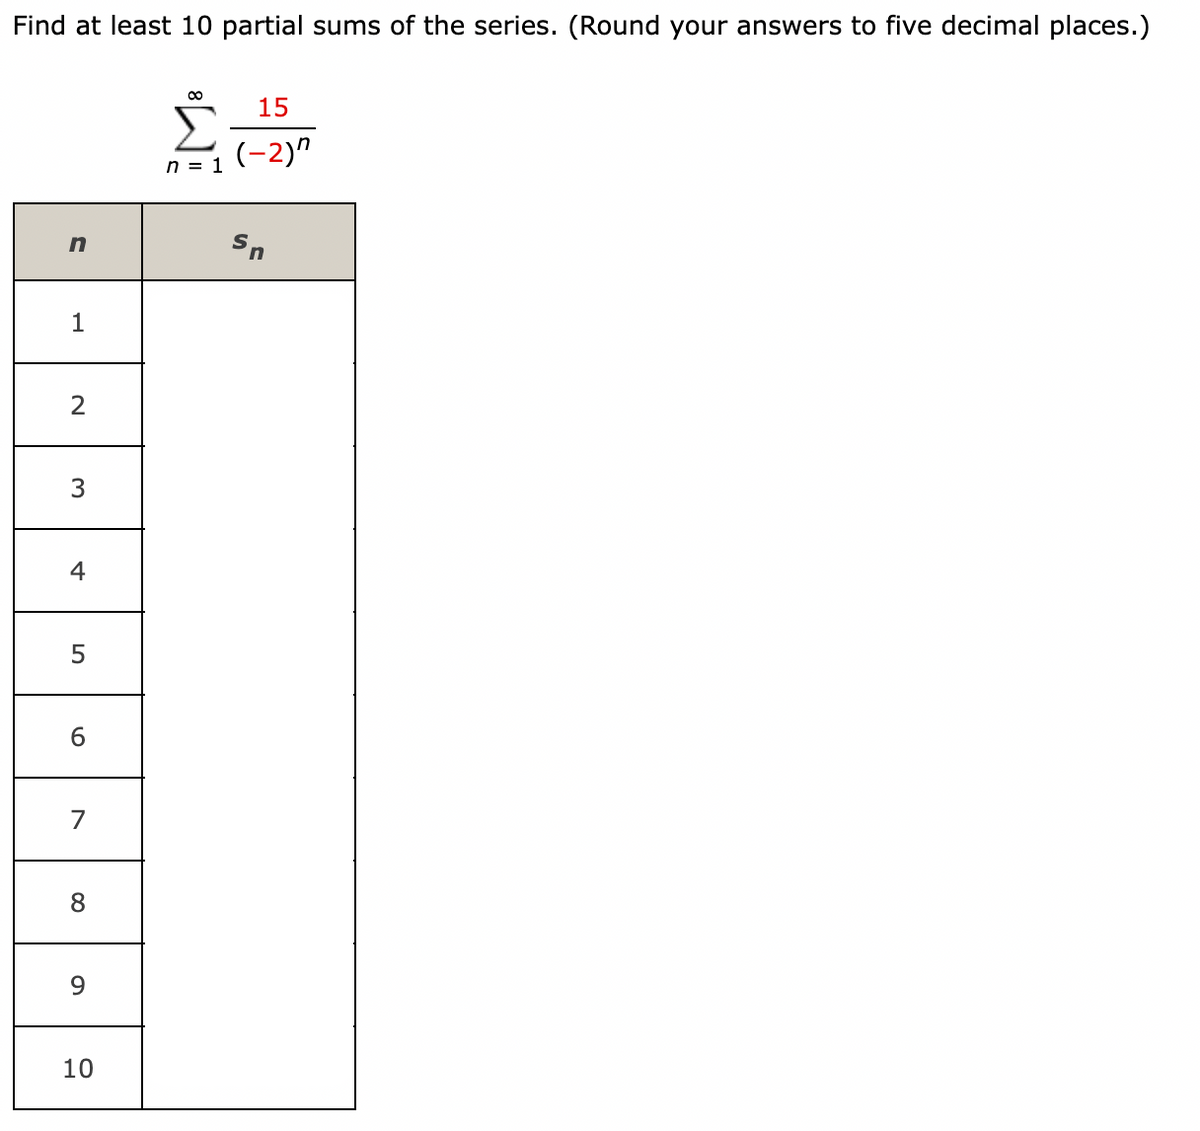 Find at least 10 partial sums of the series. (Round your answers to five decimal places.)
n
1
2
3
4
5
6
7
8
9
10
n = 1
15
(-2)"
Sn